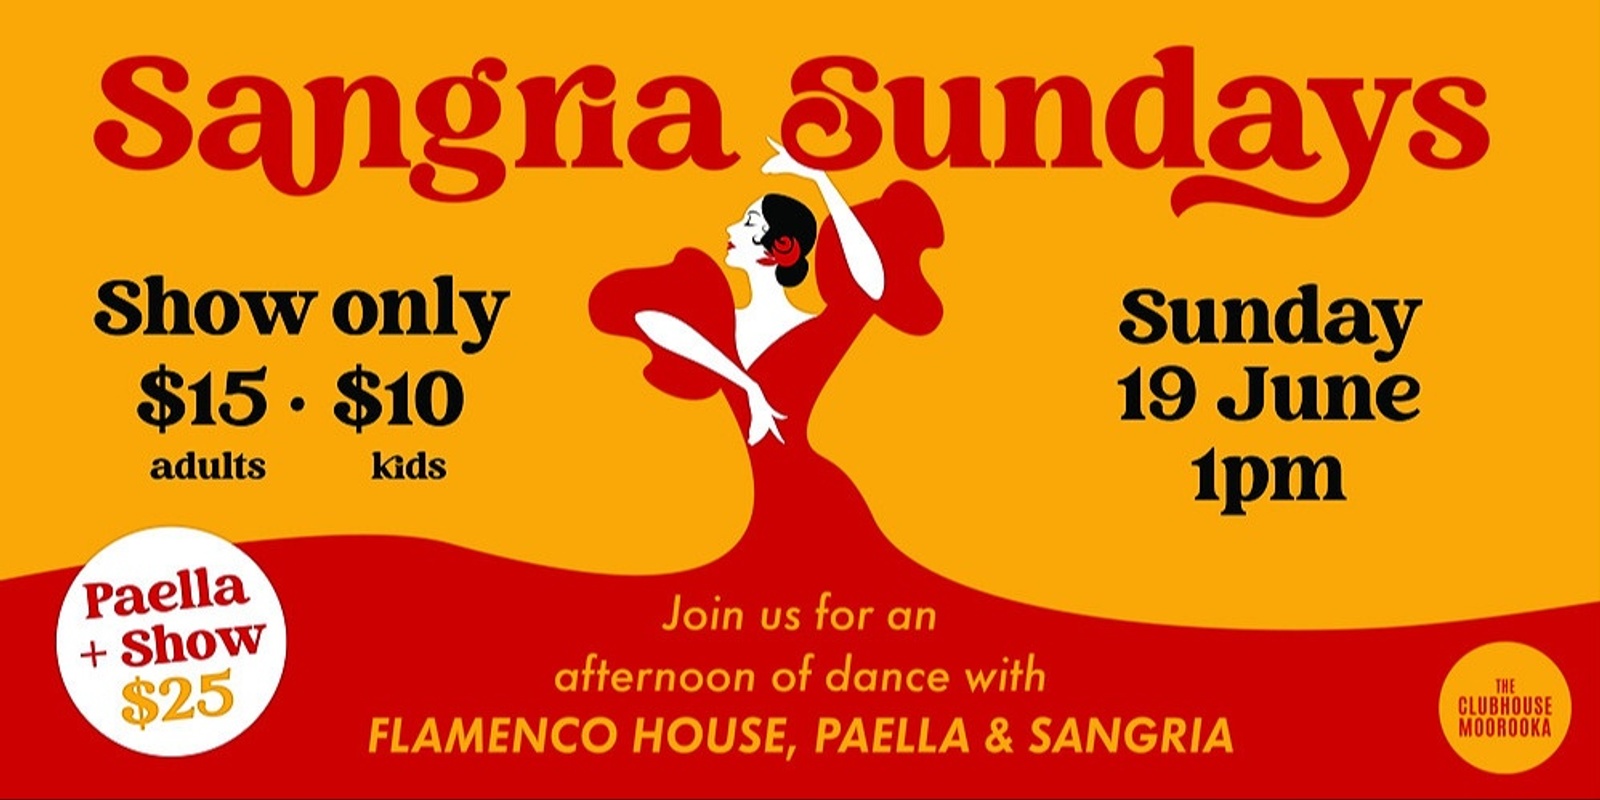 Banner image for Sangria Sunday